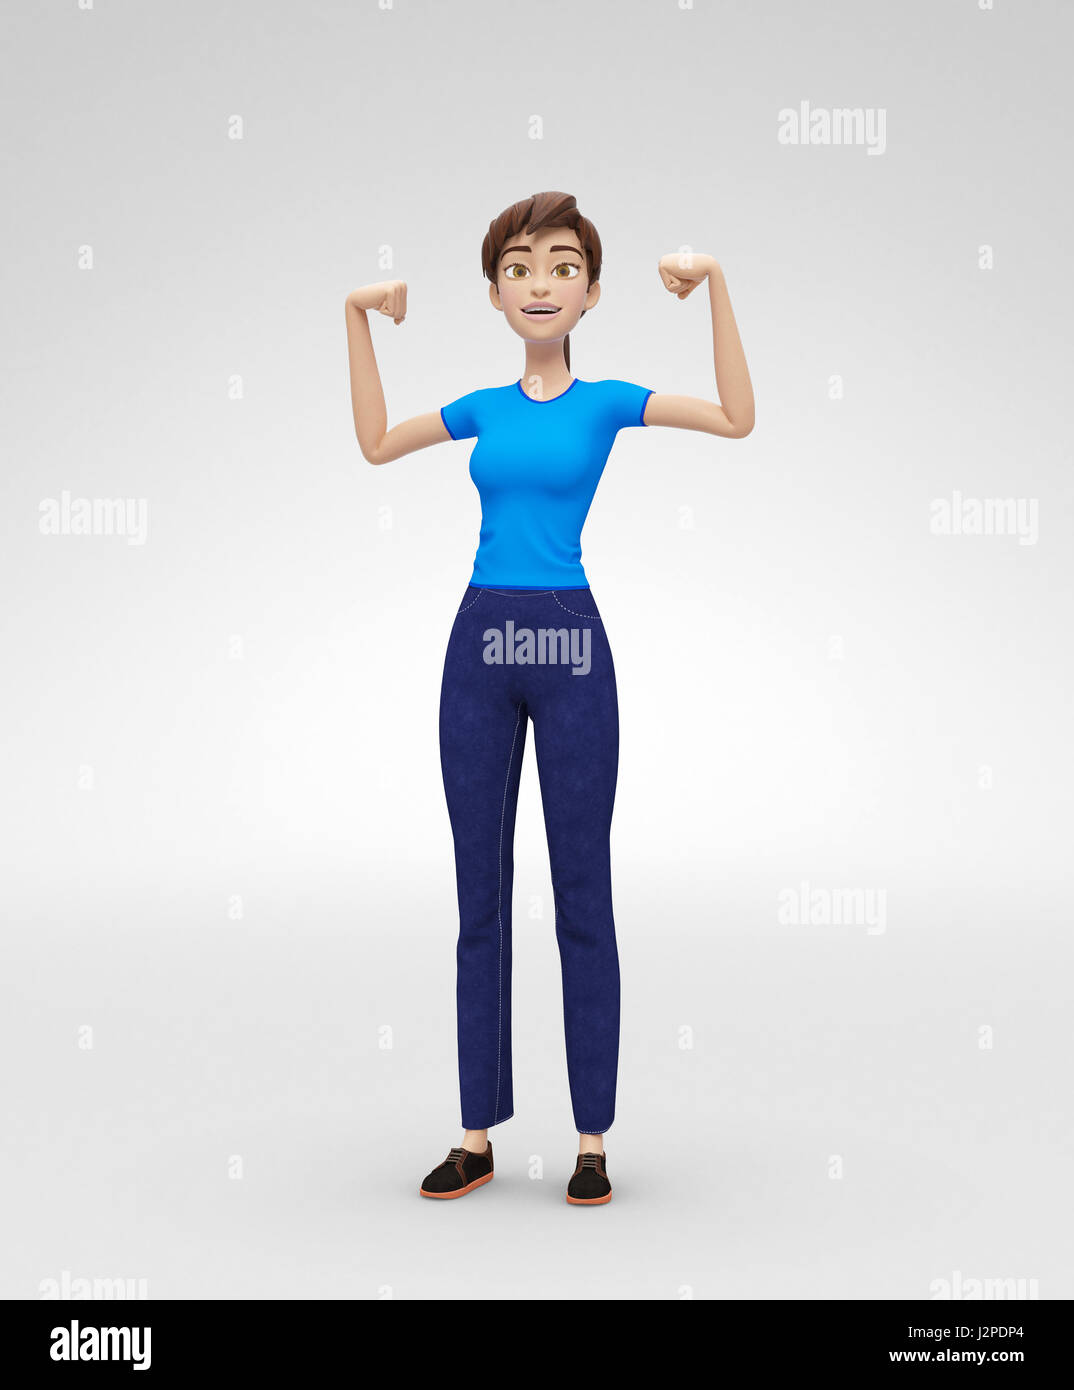 Confident, Strong Jenny - 3D Cartoon Female Character Model - Projects  Power, Demonstrates Strength and Shows Muscles Stock Photo - Alamy